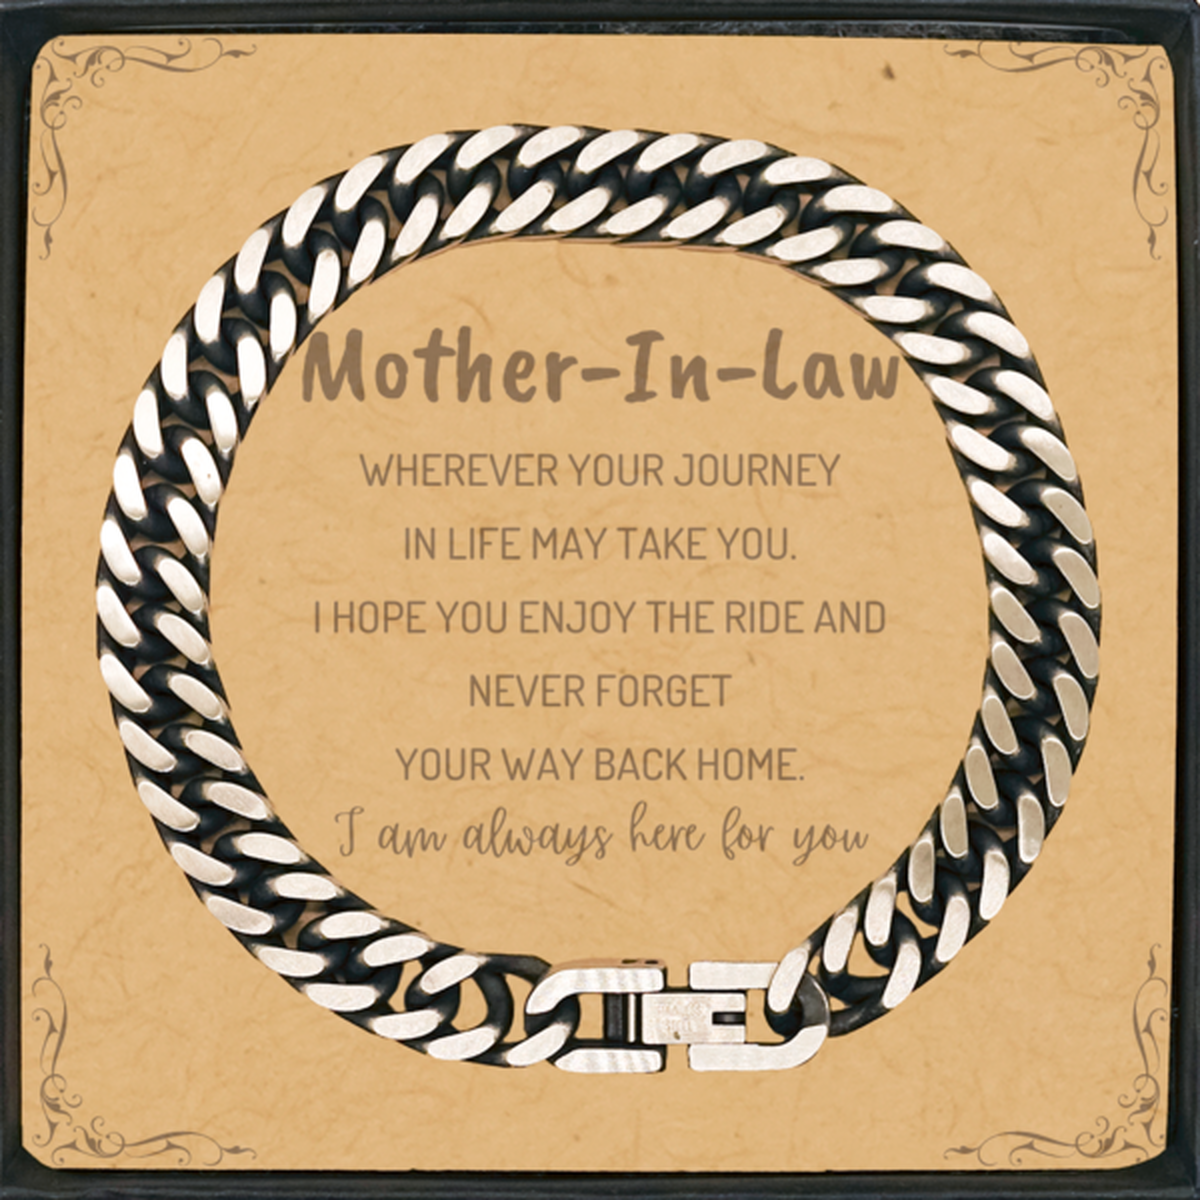 Mother-In-Law wherever your journey in life may take you, I am always here for you Mother-In-Law Cuban Link Chain Bracelet, Awesome Christmas Gifts For Mother-In-Law Message Card, Mother-In-Law Birthday Gifts for Men Women Family Loved One